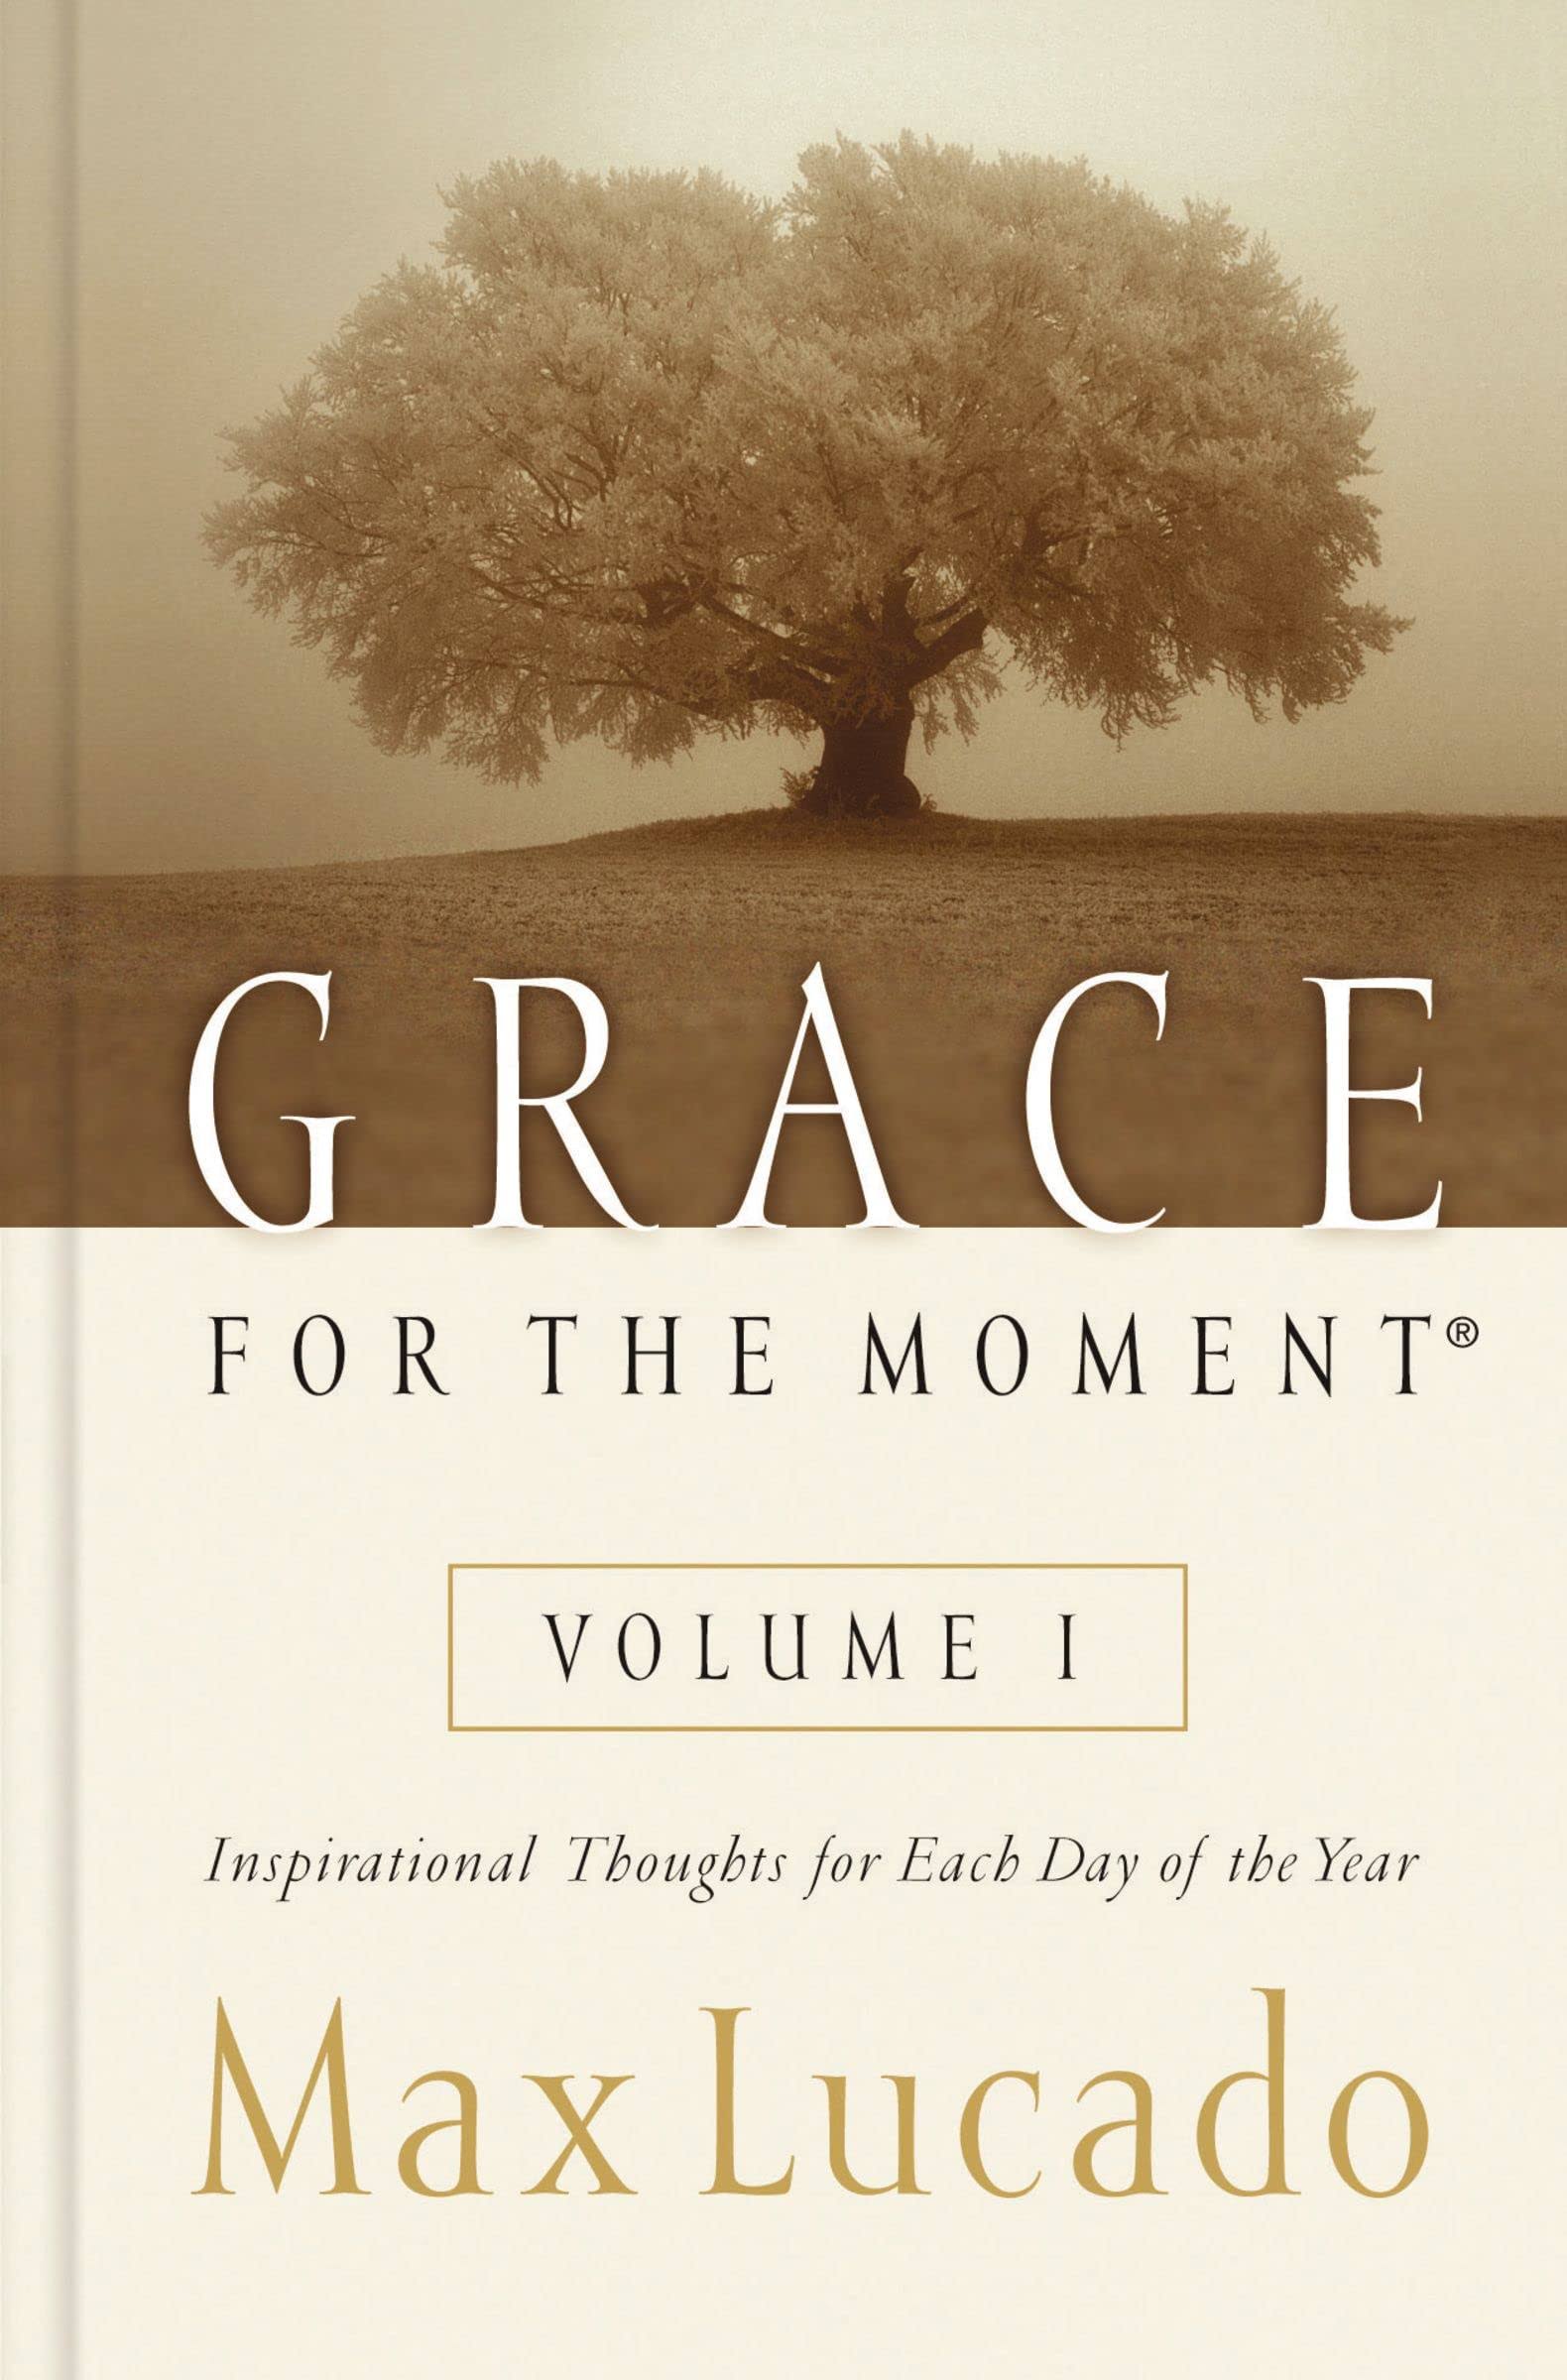 Grace for the Moment: Inspirational Thoughts for Each Day of the Year [Book]